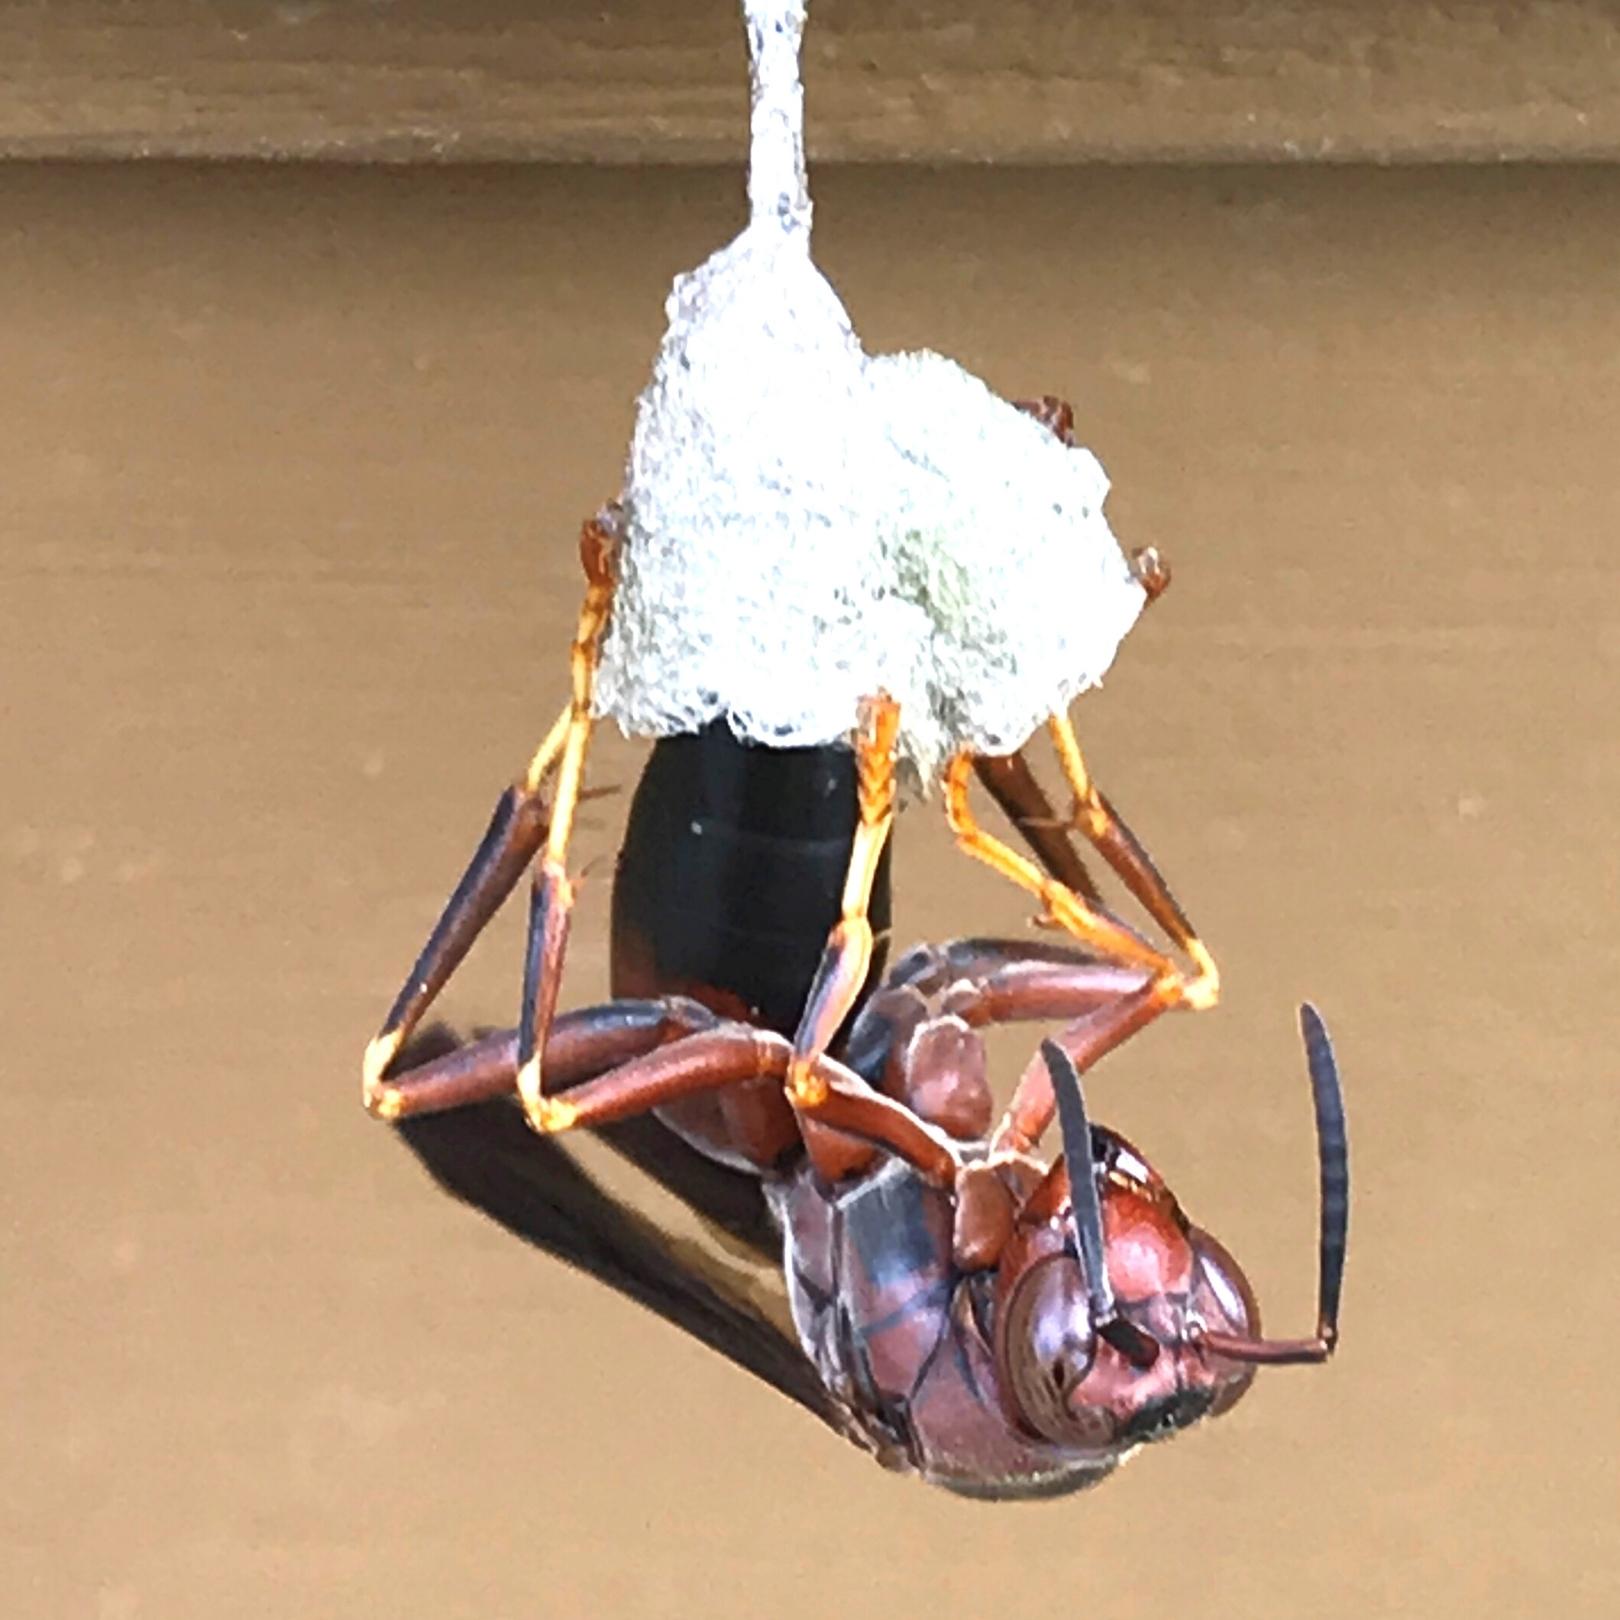 A paper wasp queen building a nest